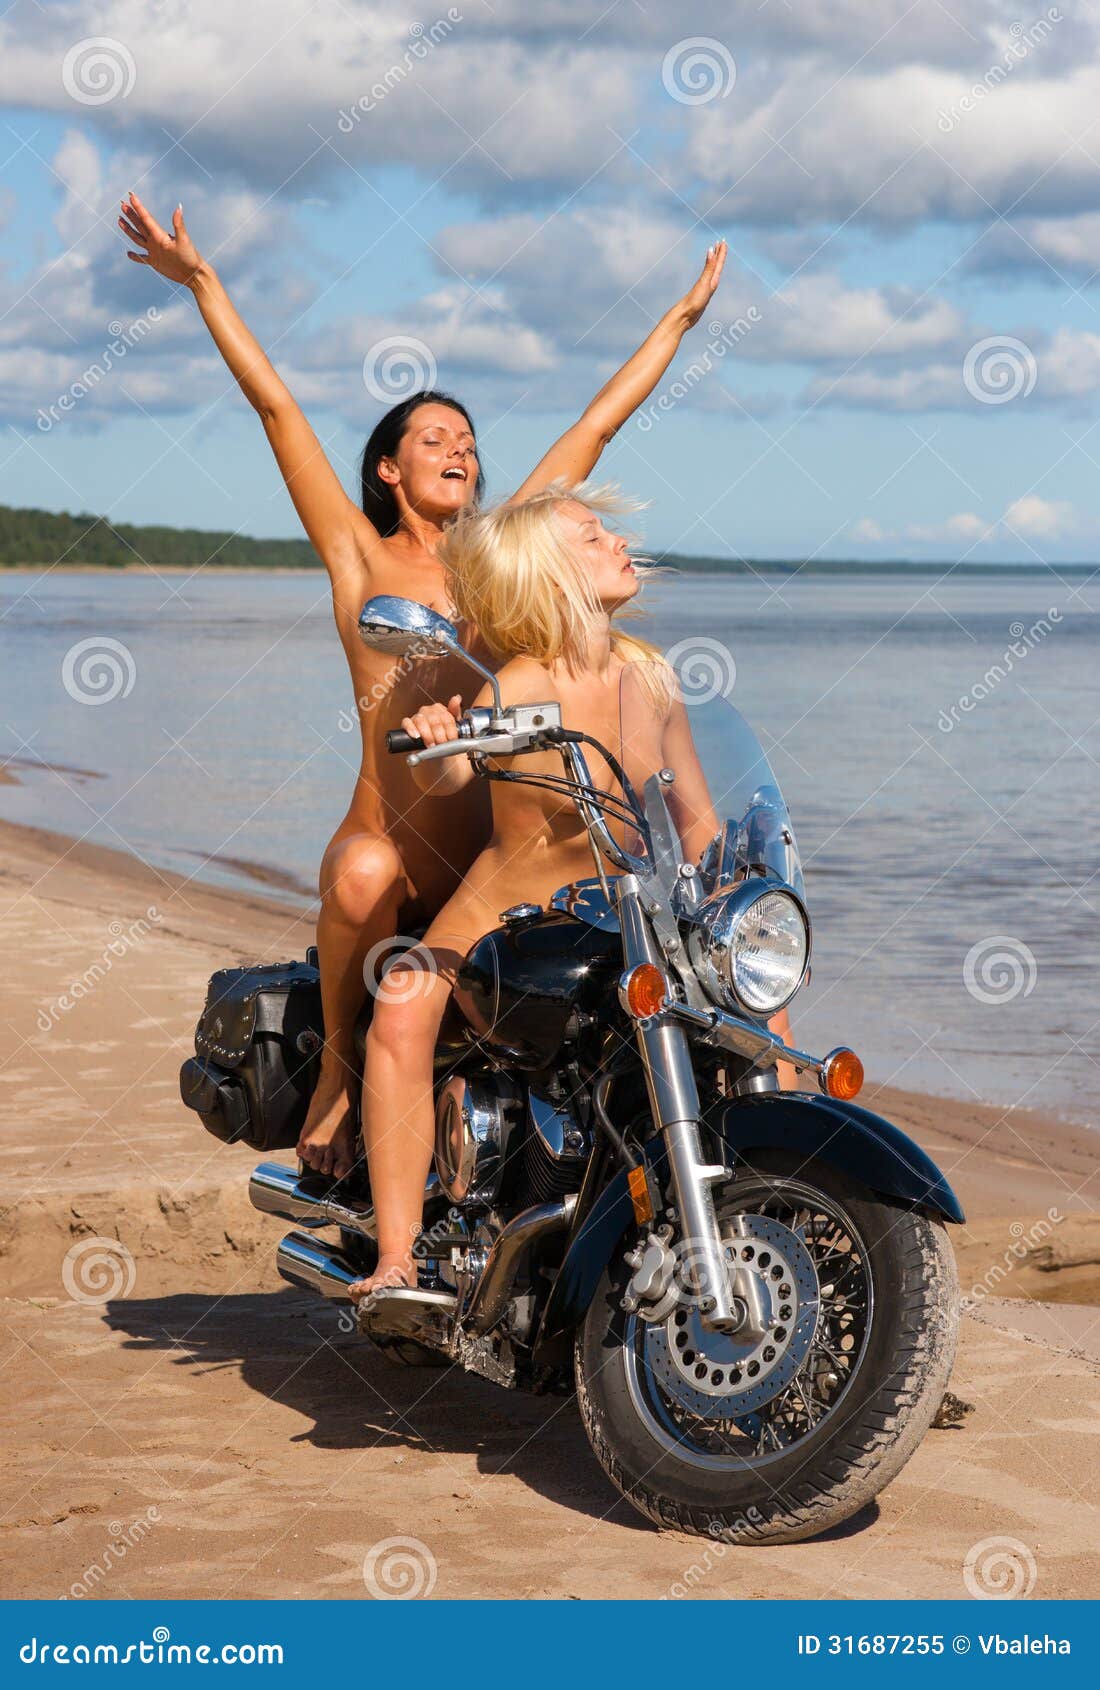 Weather Broadcast Nude Women With Motorcycles